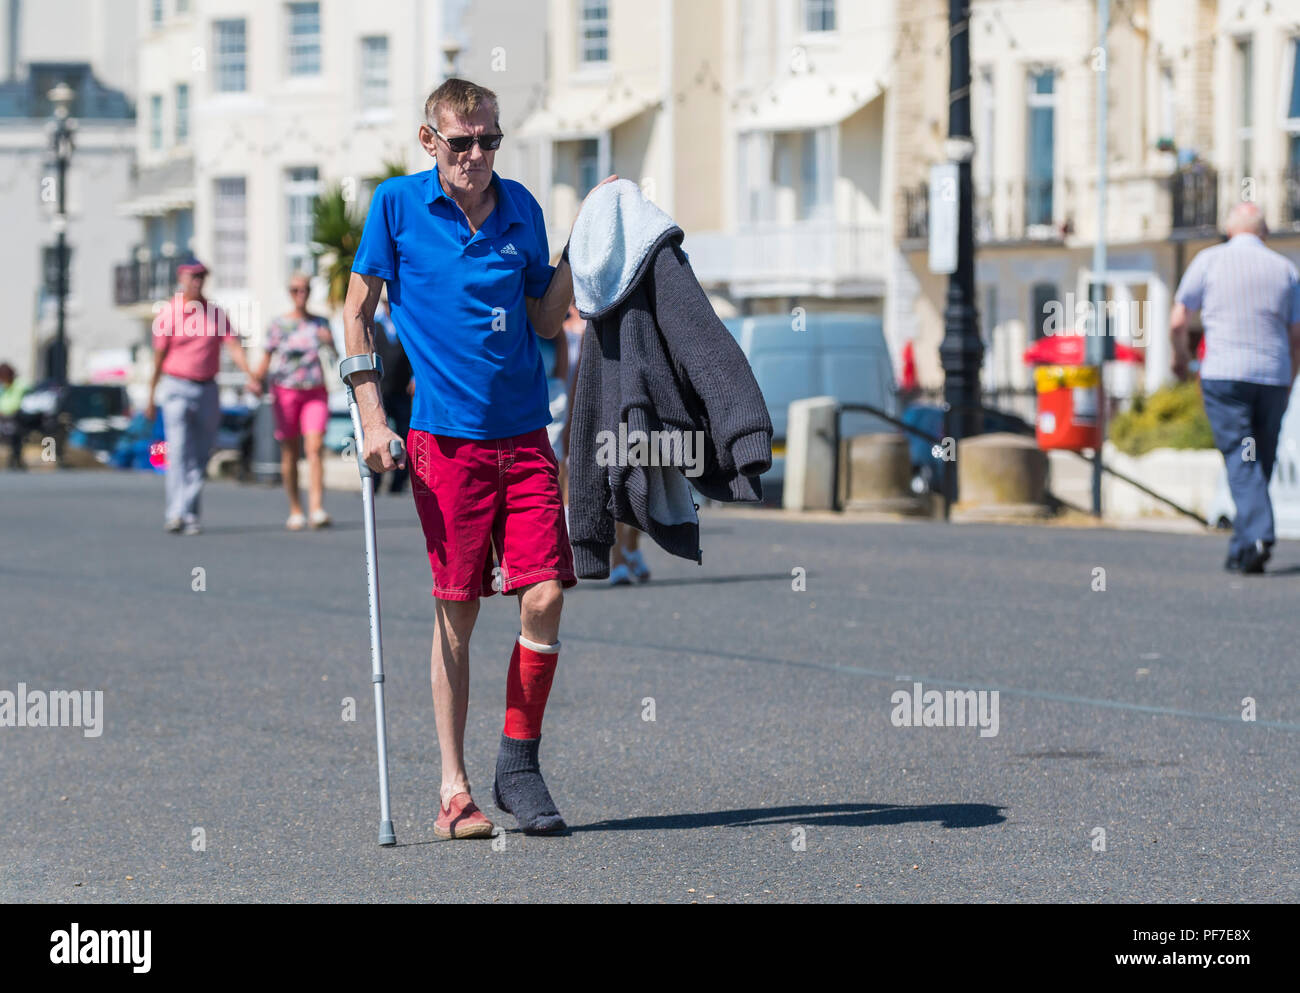 Man with injured leg walking with the aid of a crutch. Man walking with crutches. Stock Photo